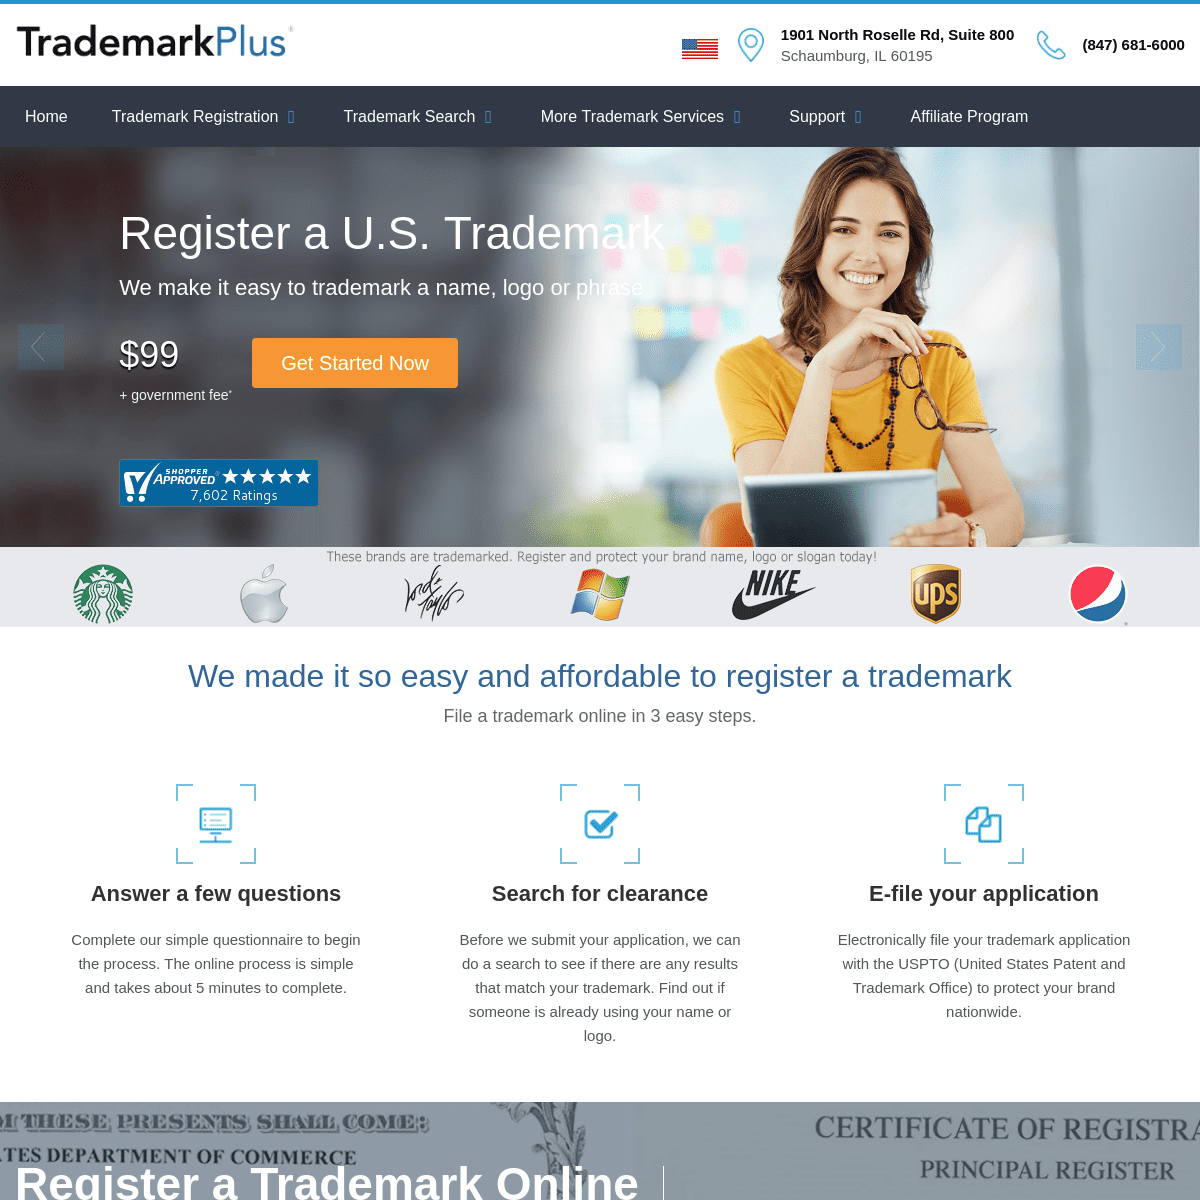 A complete backup of trademarkplus.com